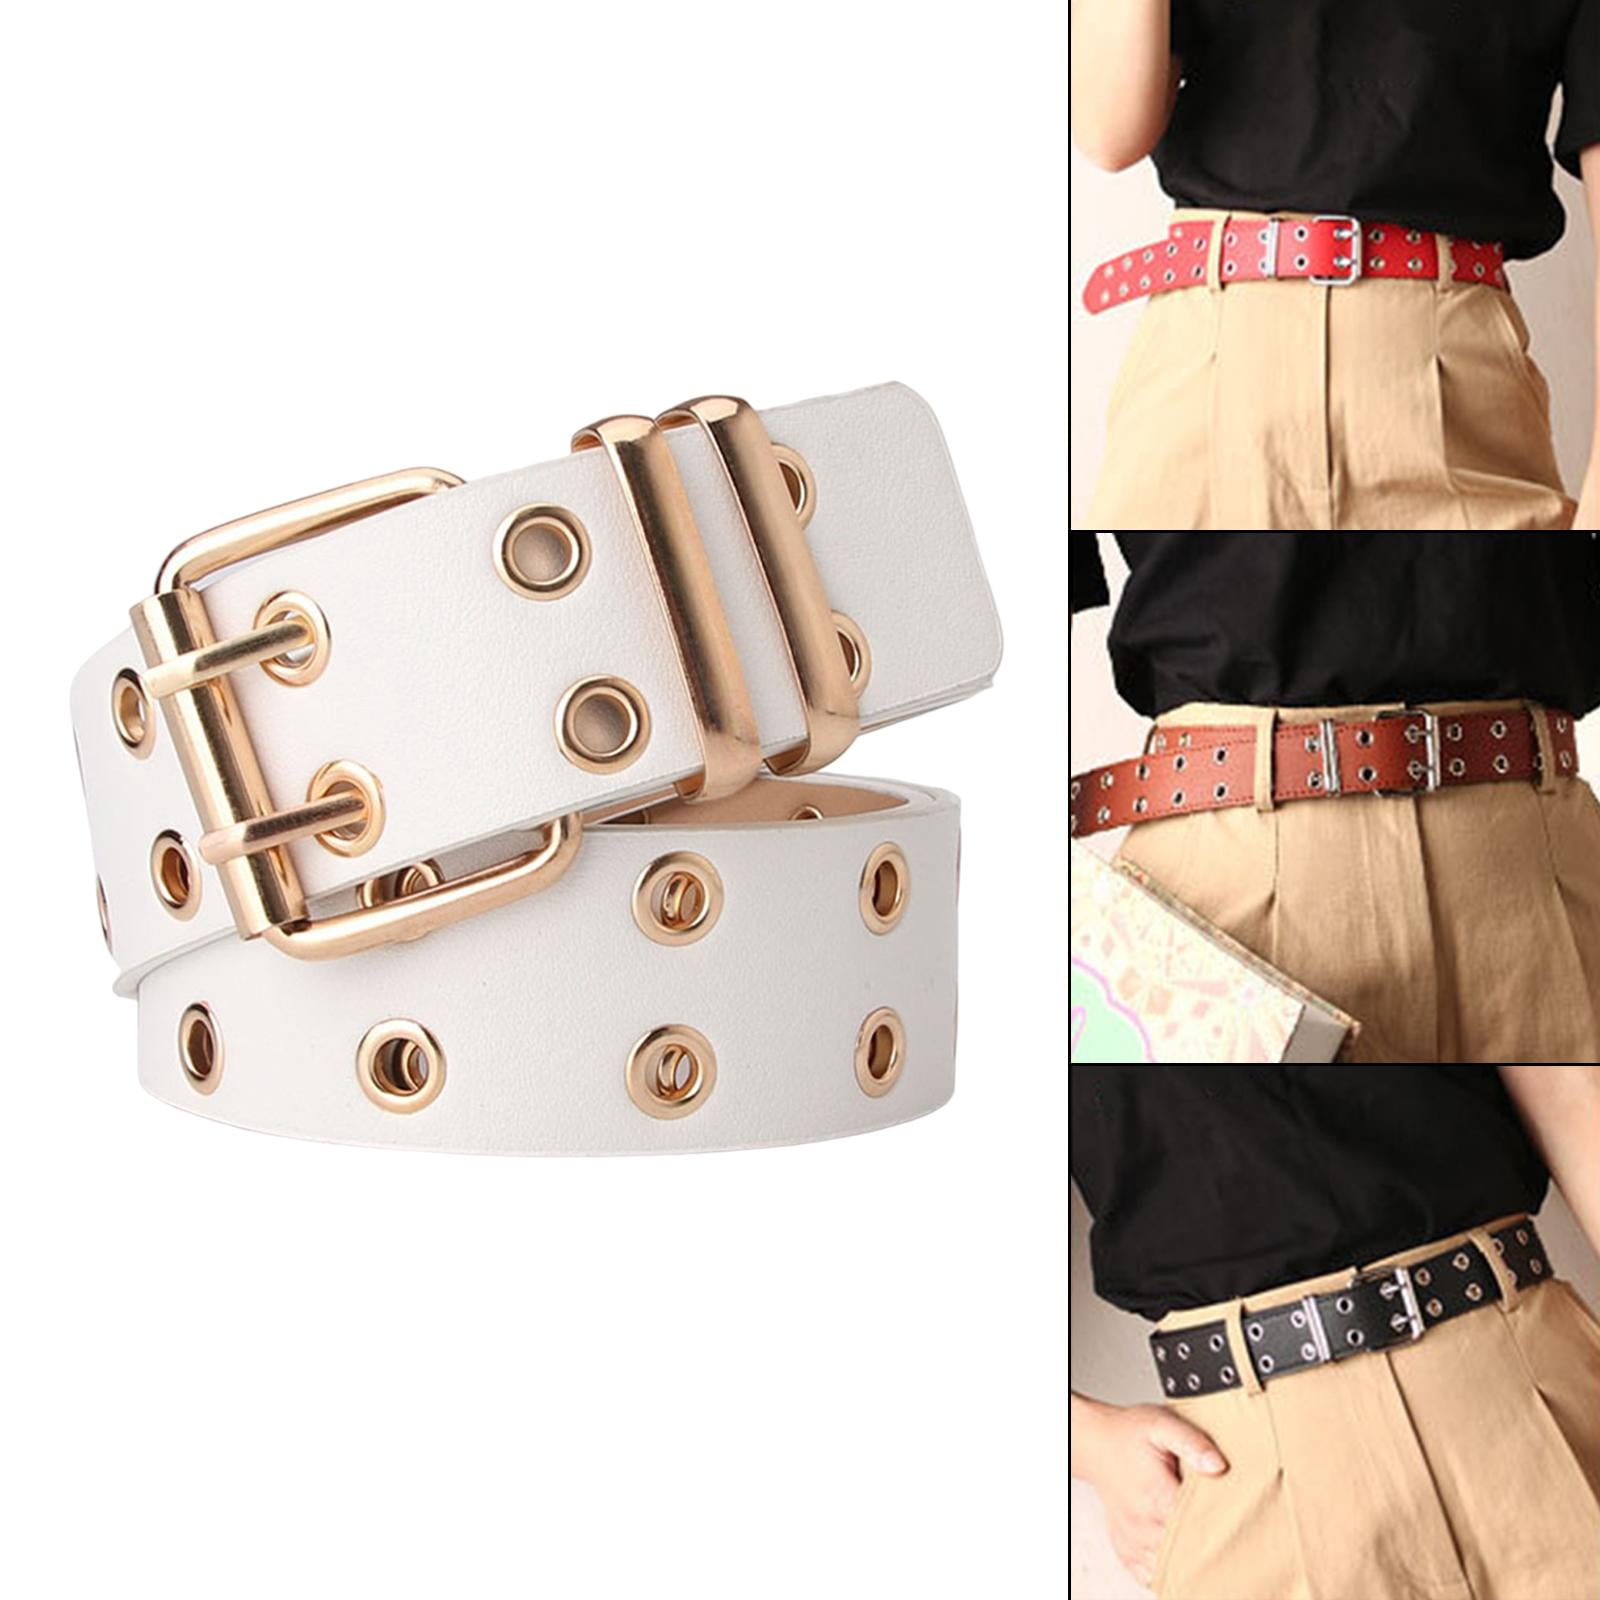 Double Grommet Punk Belt, Vintage Gothic Adjustable PU Leather Fashion  Hollow Eyelet Accessories, with for Pants Jeans. , White